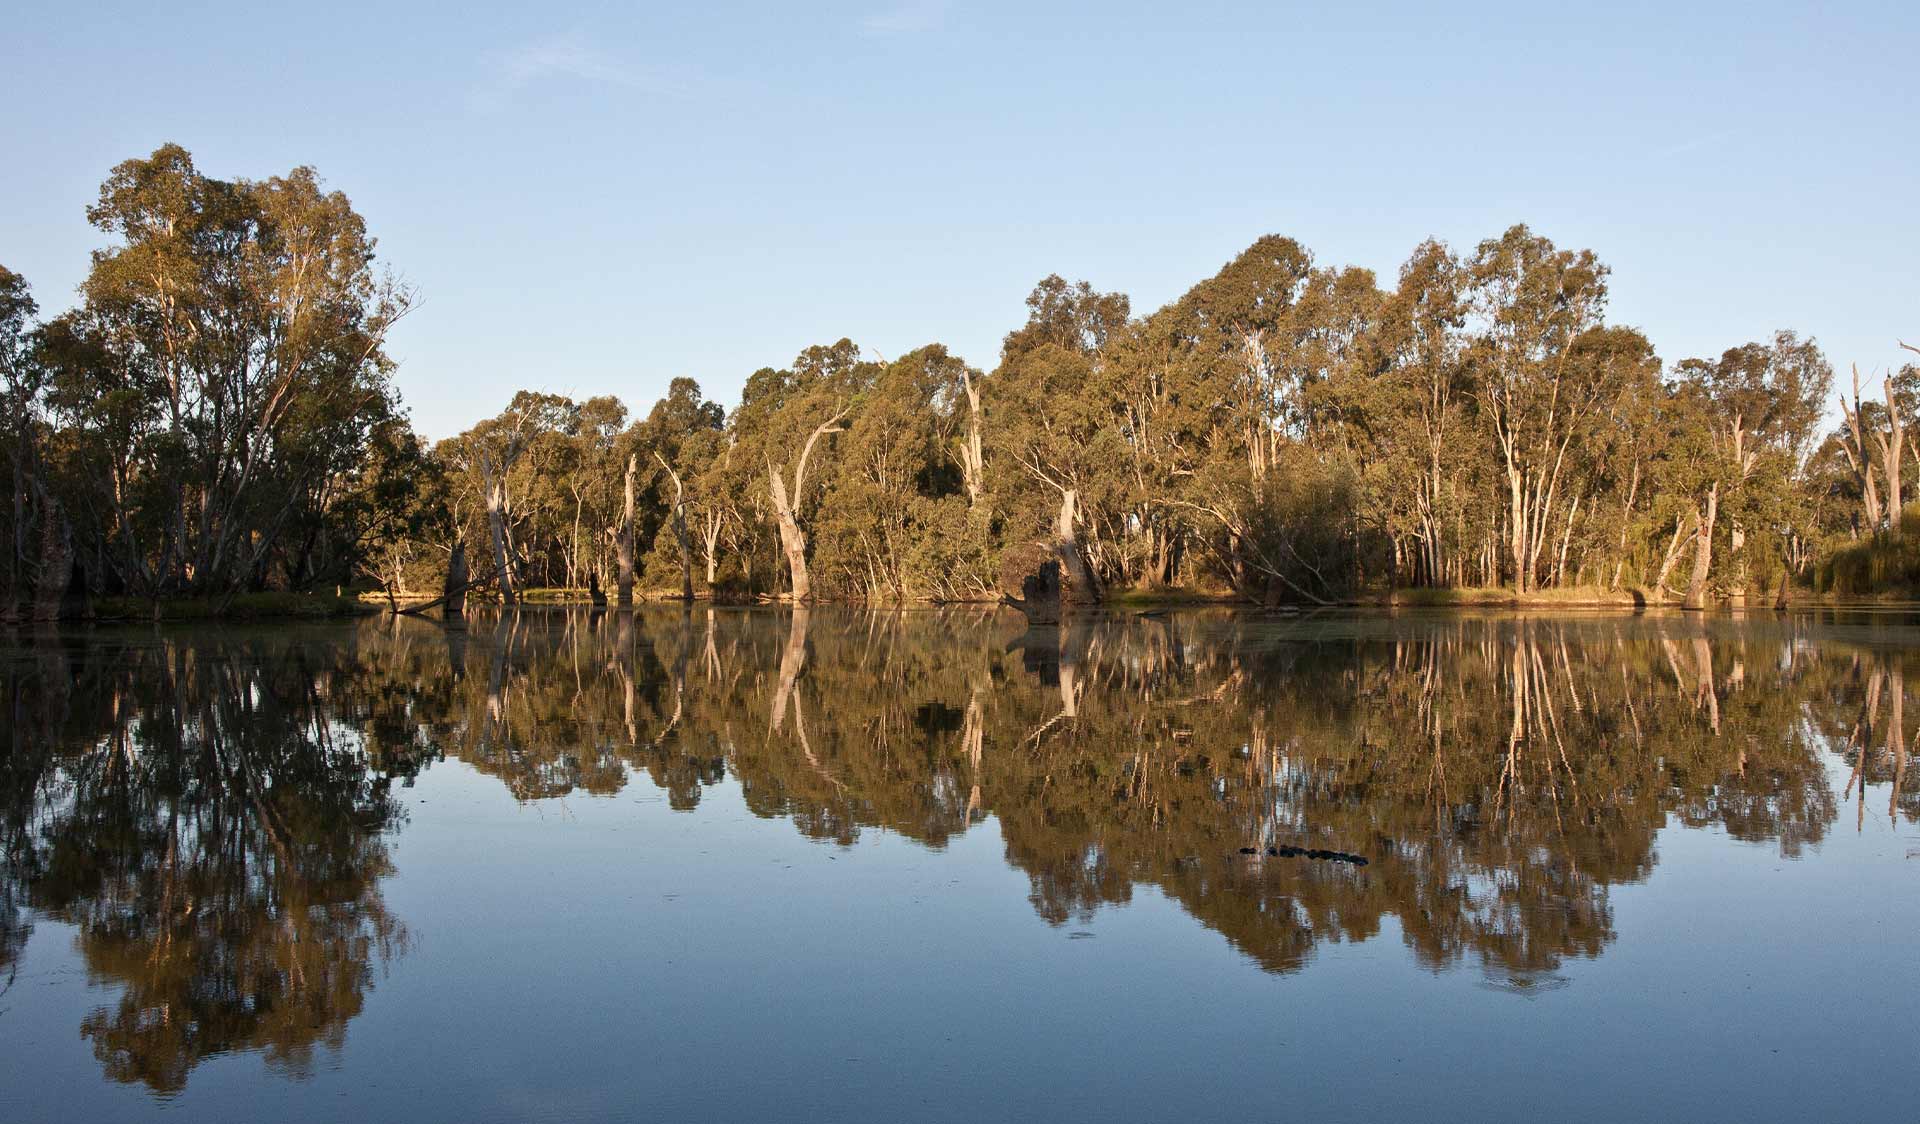 The reflection of the sky in the Ovens River wetlands in the Warby-Ovens National Park